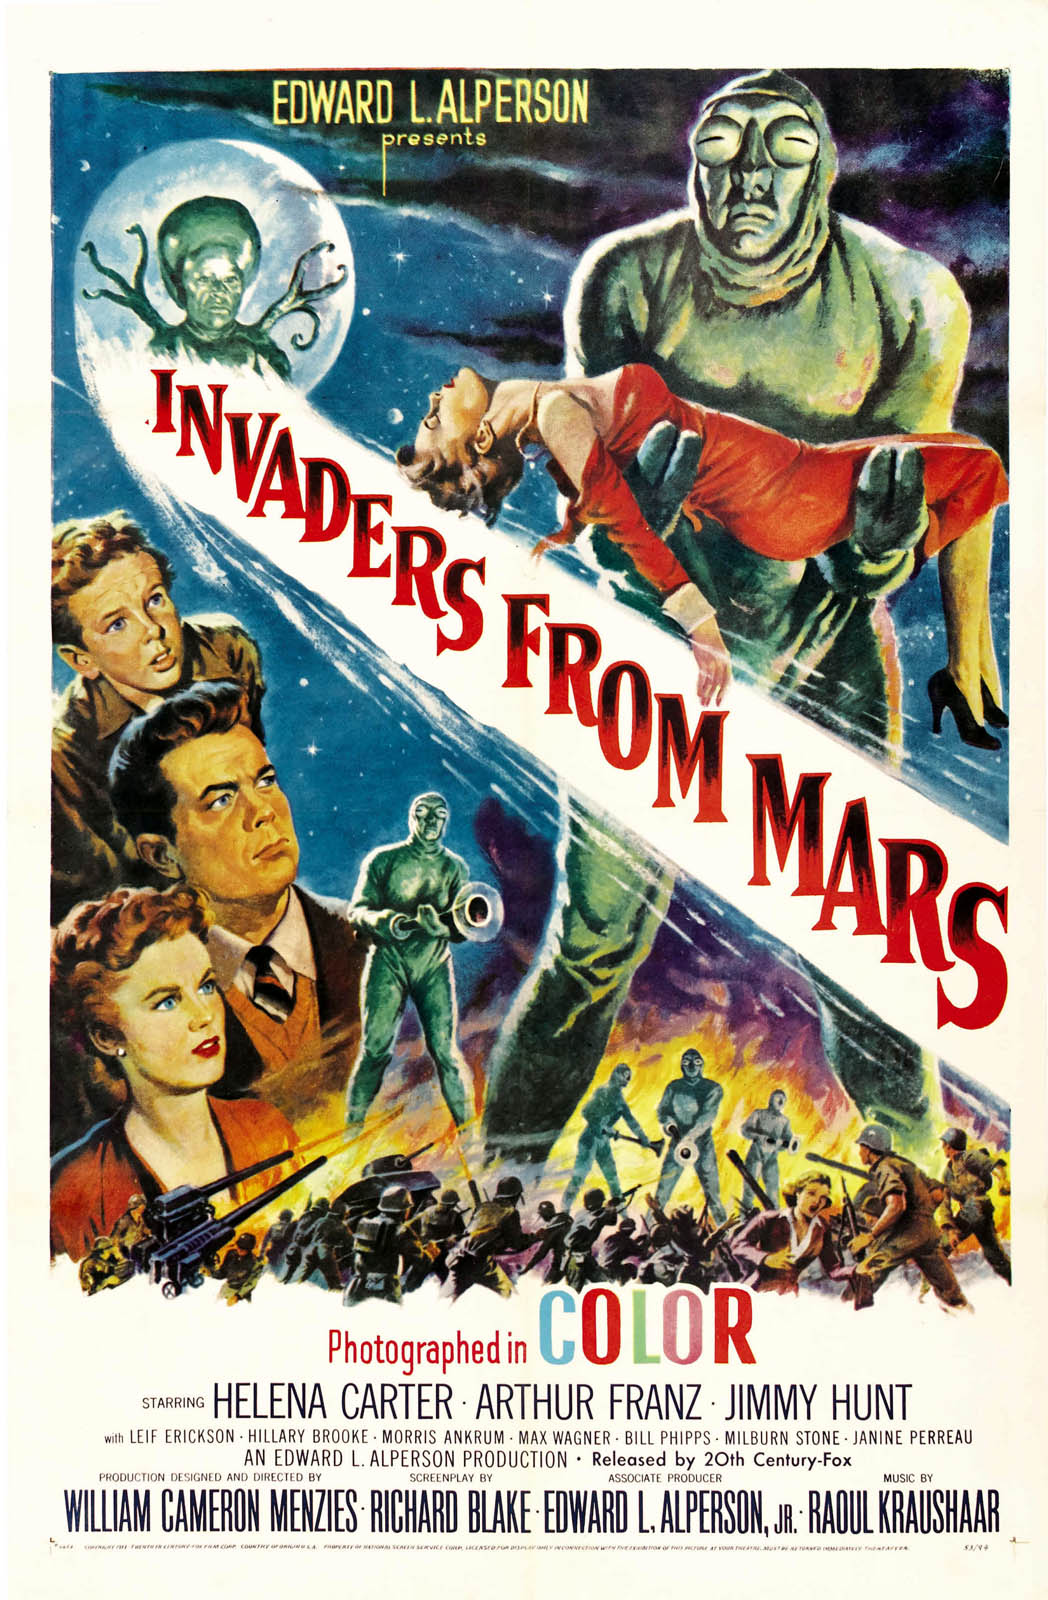 INVADERS FROM MARS